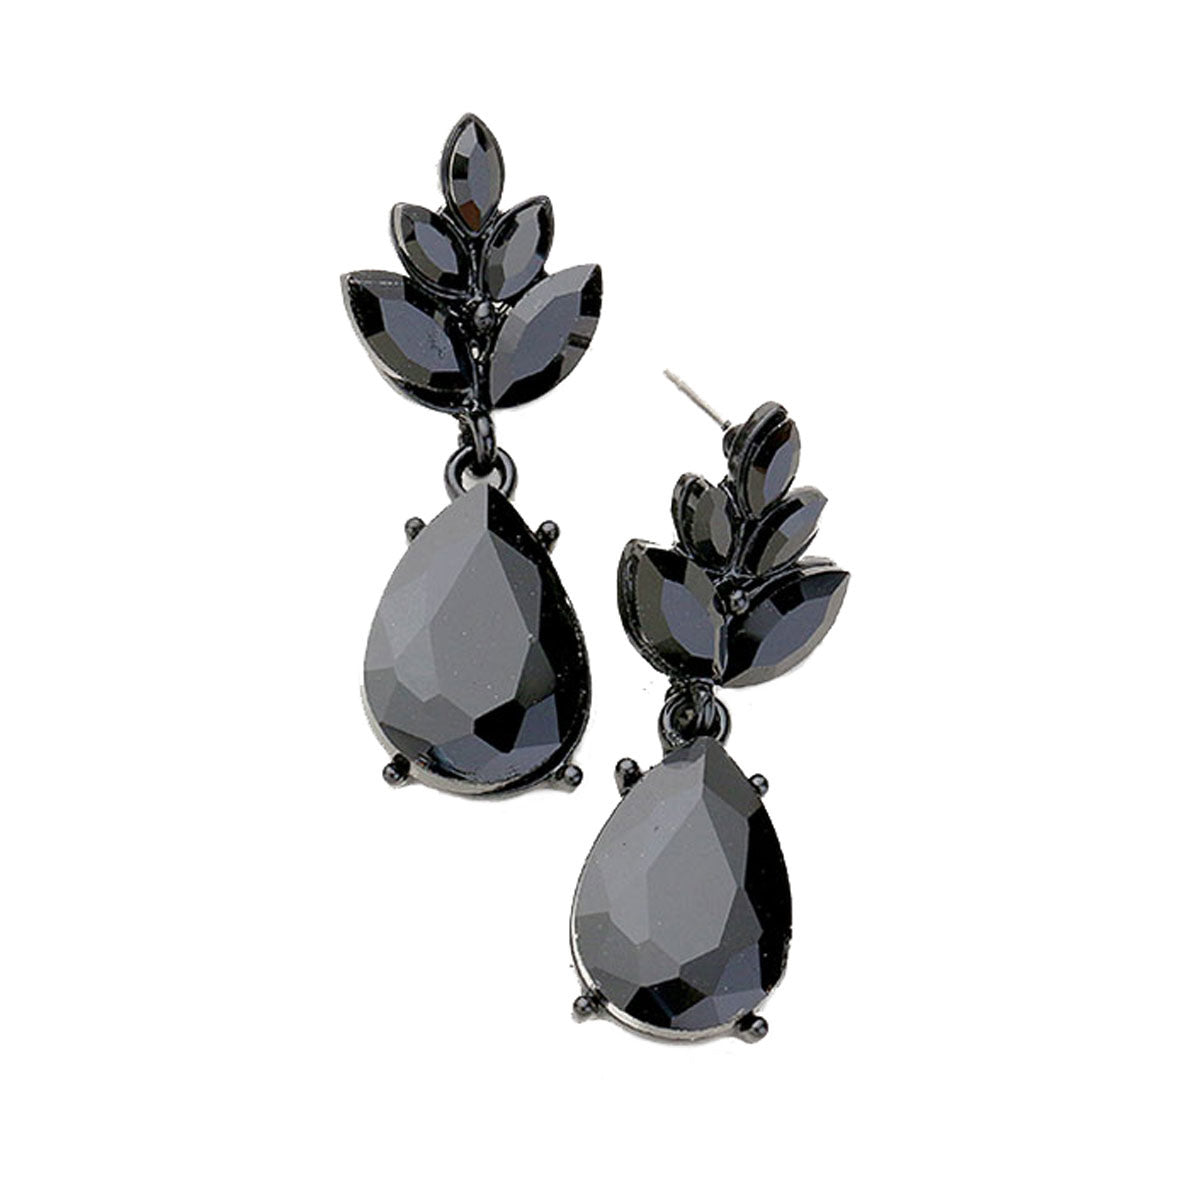 Jet Black Crystal Teardrop Cluster Vine Evening Earrings, wear over your favorite tops and dresses this season! A timeless treasure designed to add a gorgeous stylish glow to any outfit style. This piece is versatile and goes with practically anything! Fabulous Christmas Gift, Birthday Gift, Mother's Day, Loved one gift.